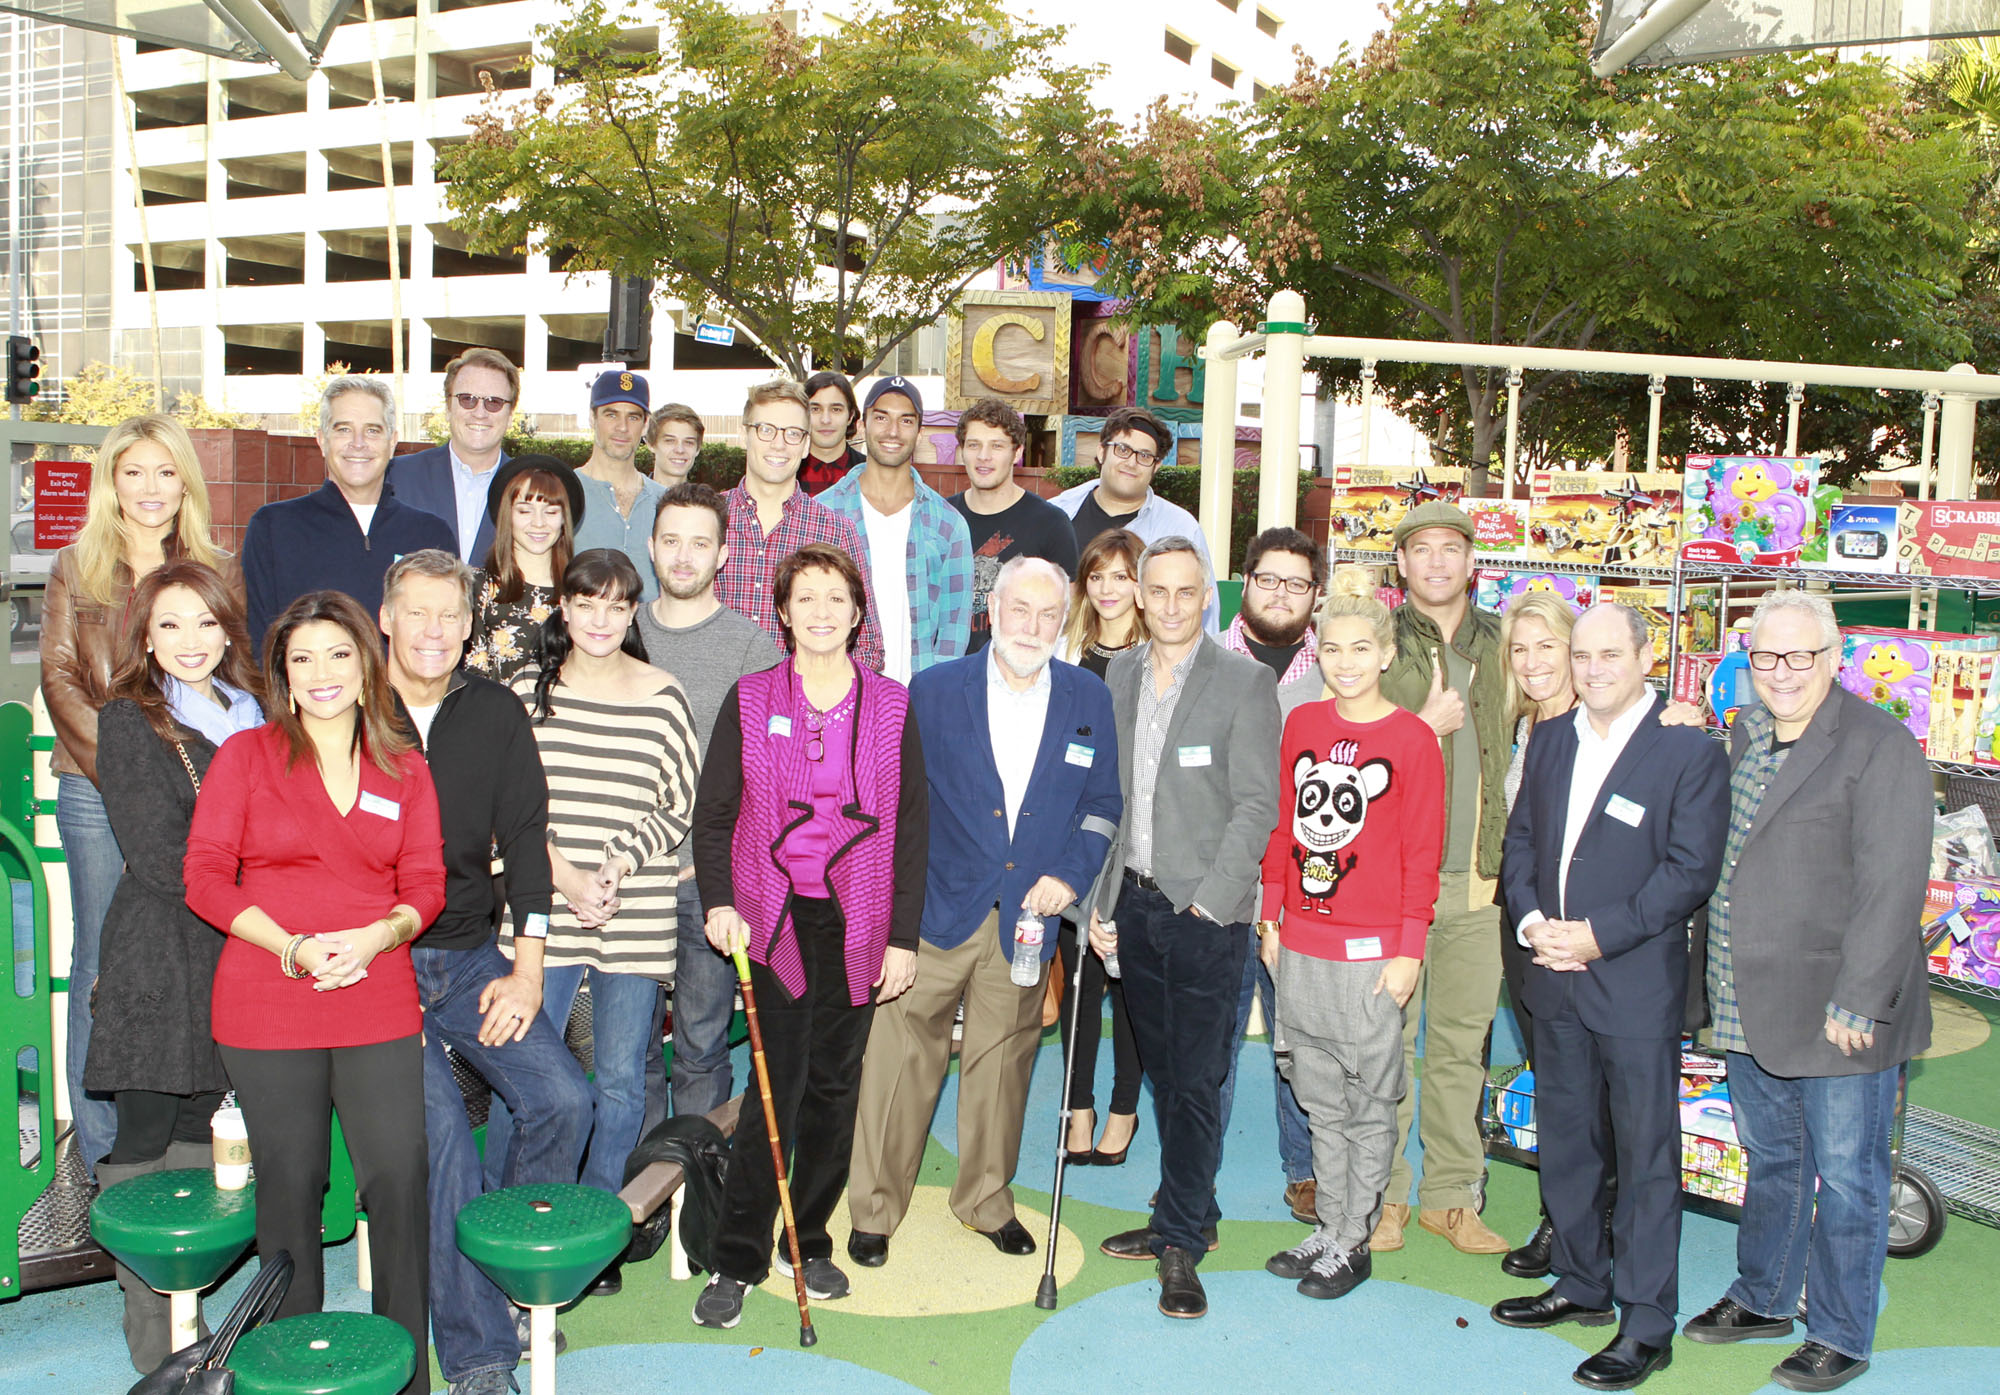 Kent Shocknek (front row, 3rd from left), CBS prime-time stars at Children's Hospital L.A. 12/14